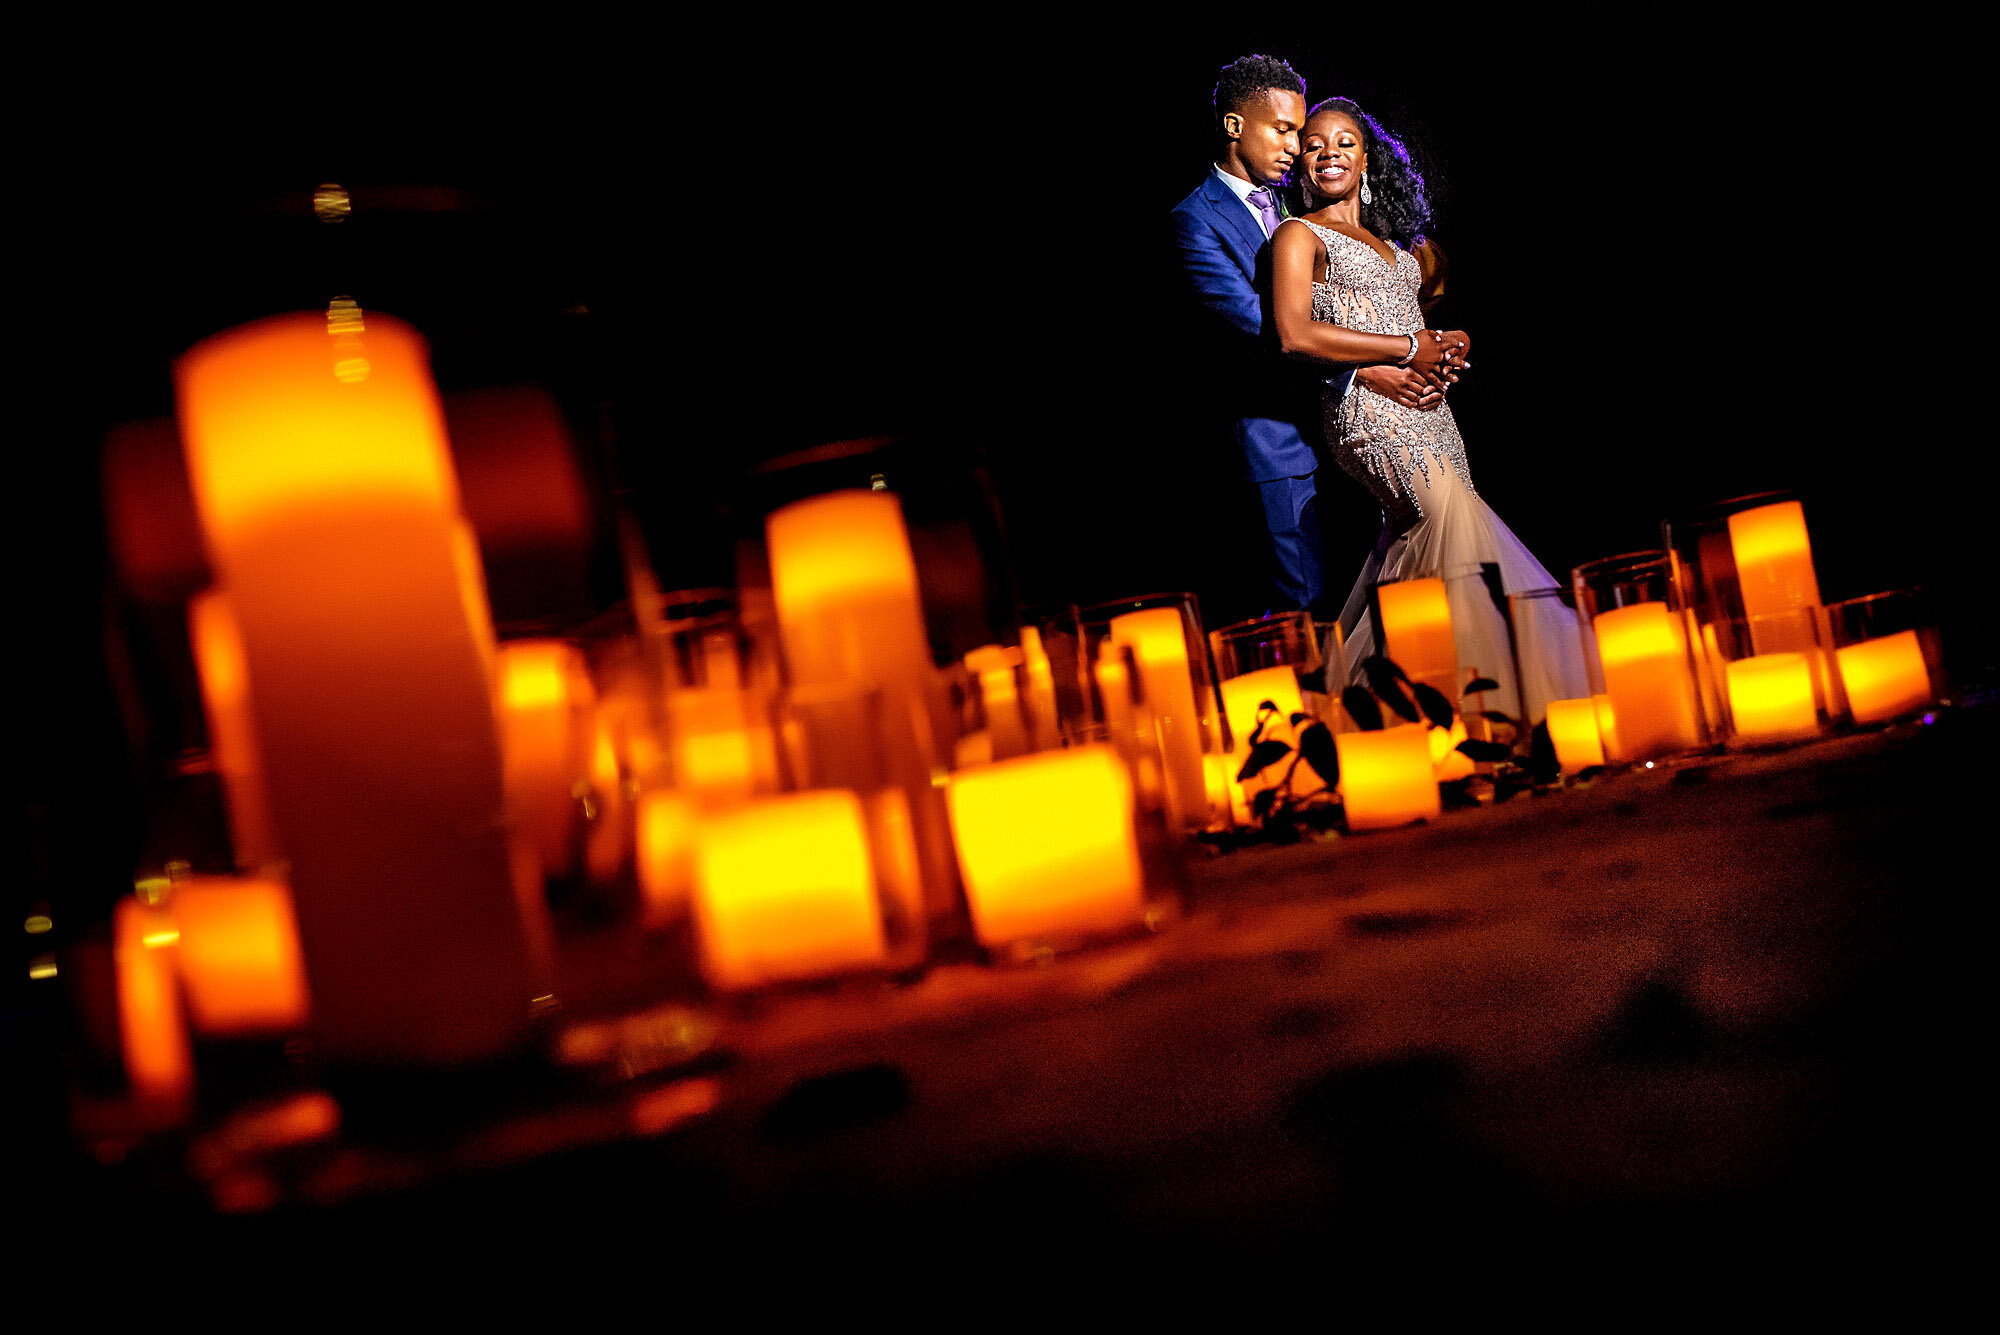 60-Austin-wedding-photographer-Jide-Alakija-couples portrait with candles in the foreground.jpg.JPG